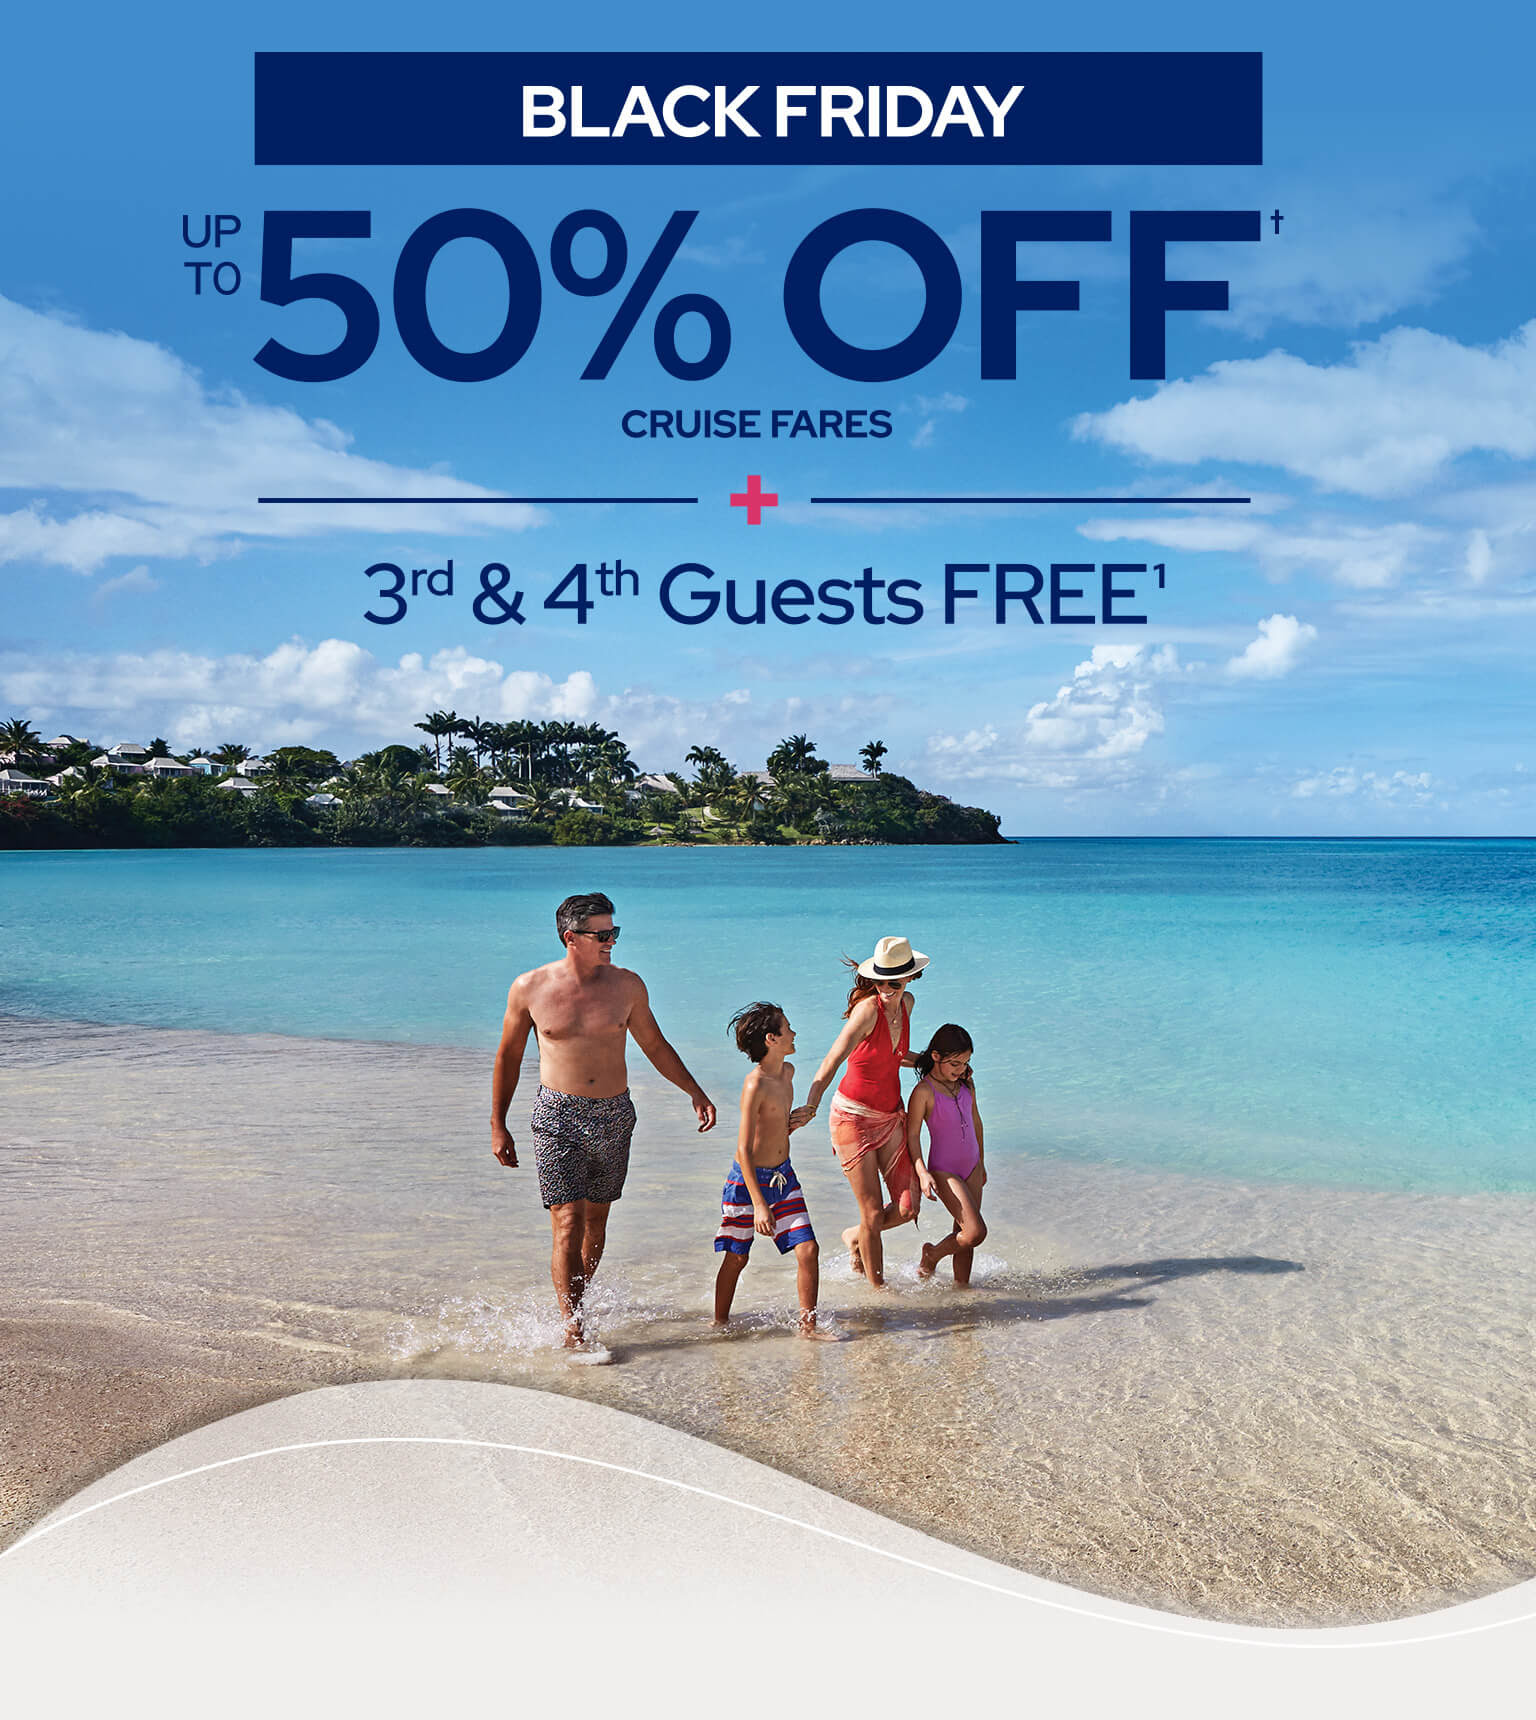 Get up to HALF OFF your next cruise - Black Friday is better with Princess with Princess Cruises Deals and Promotions